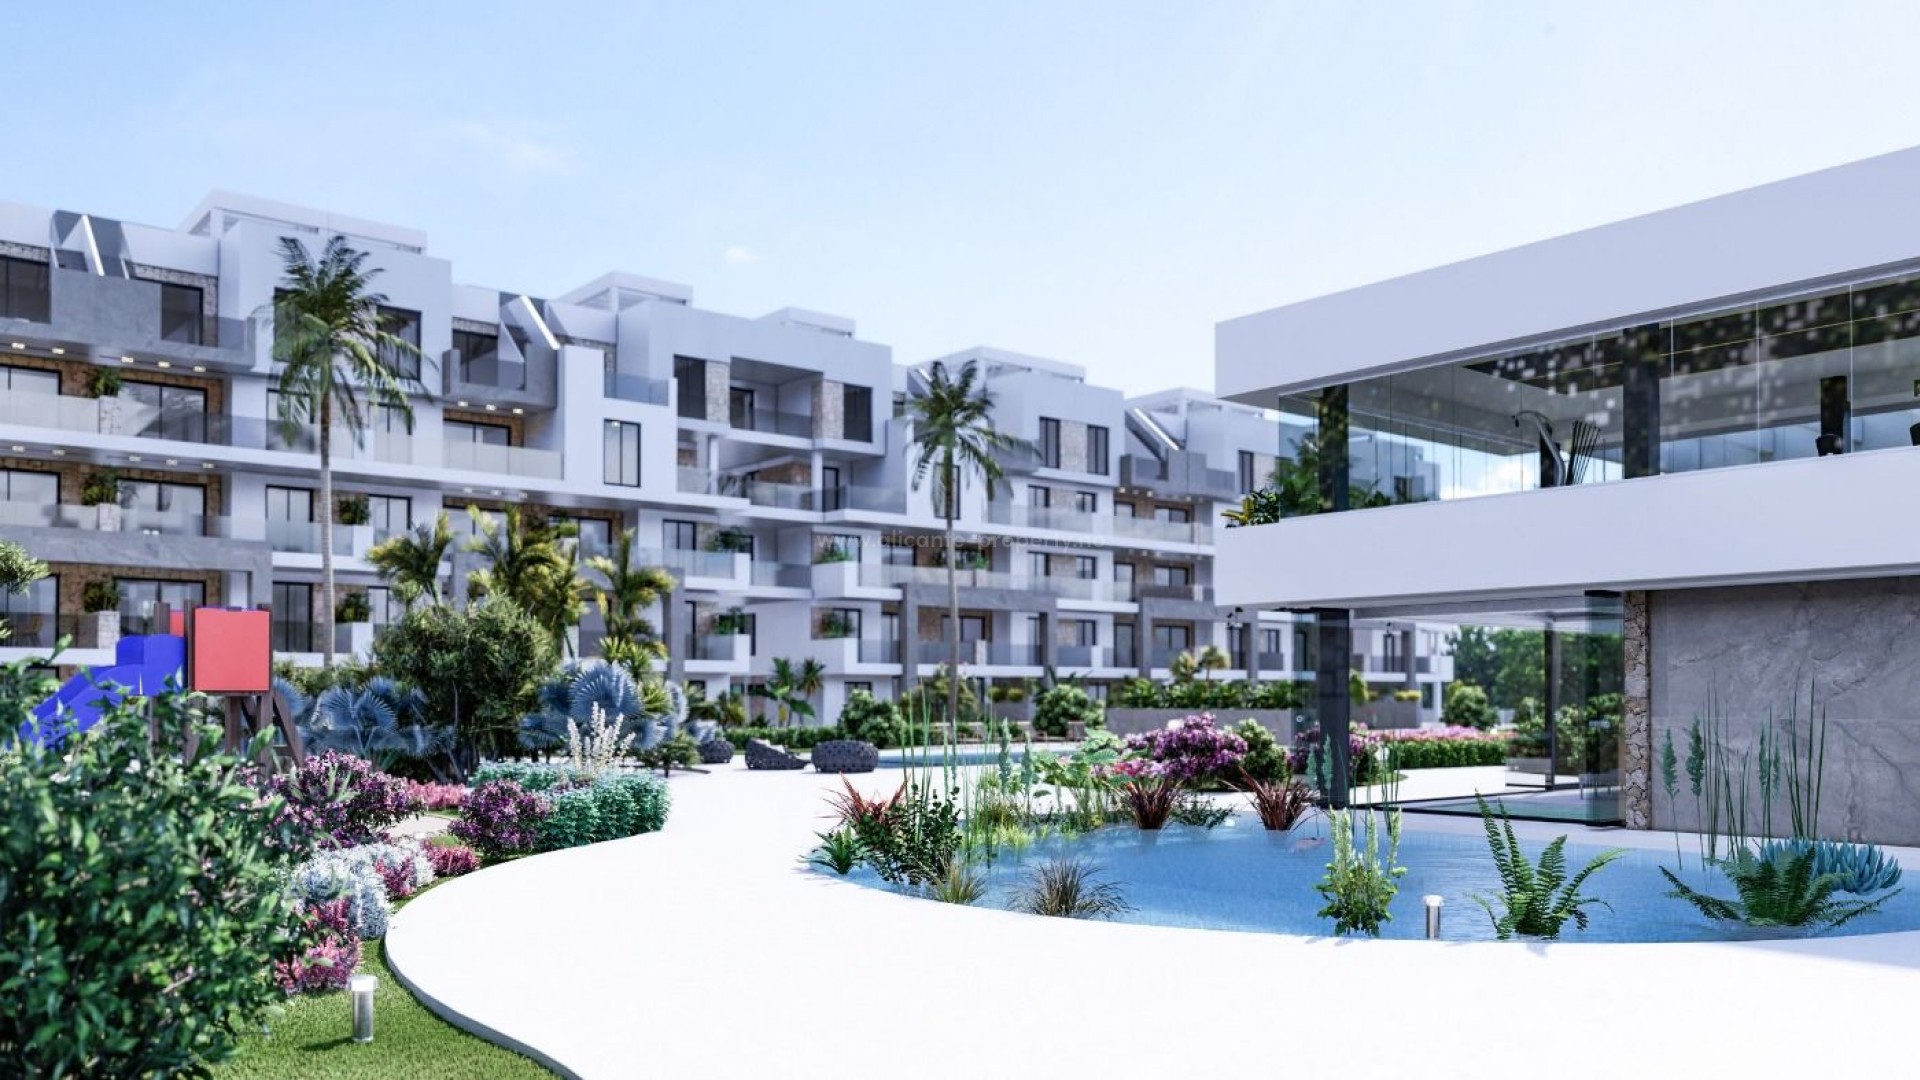 New build residential complex with apartments in El Raso, Guardamar del Segura, 2/3 bedrooms, 2 bathrooms, communal large open spaces, nature and swimming pools